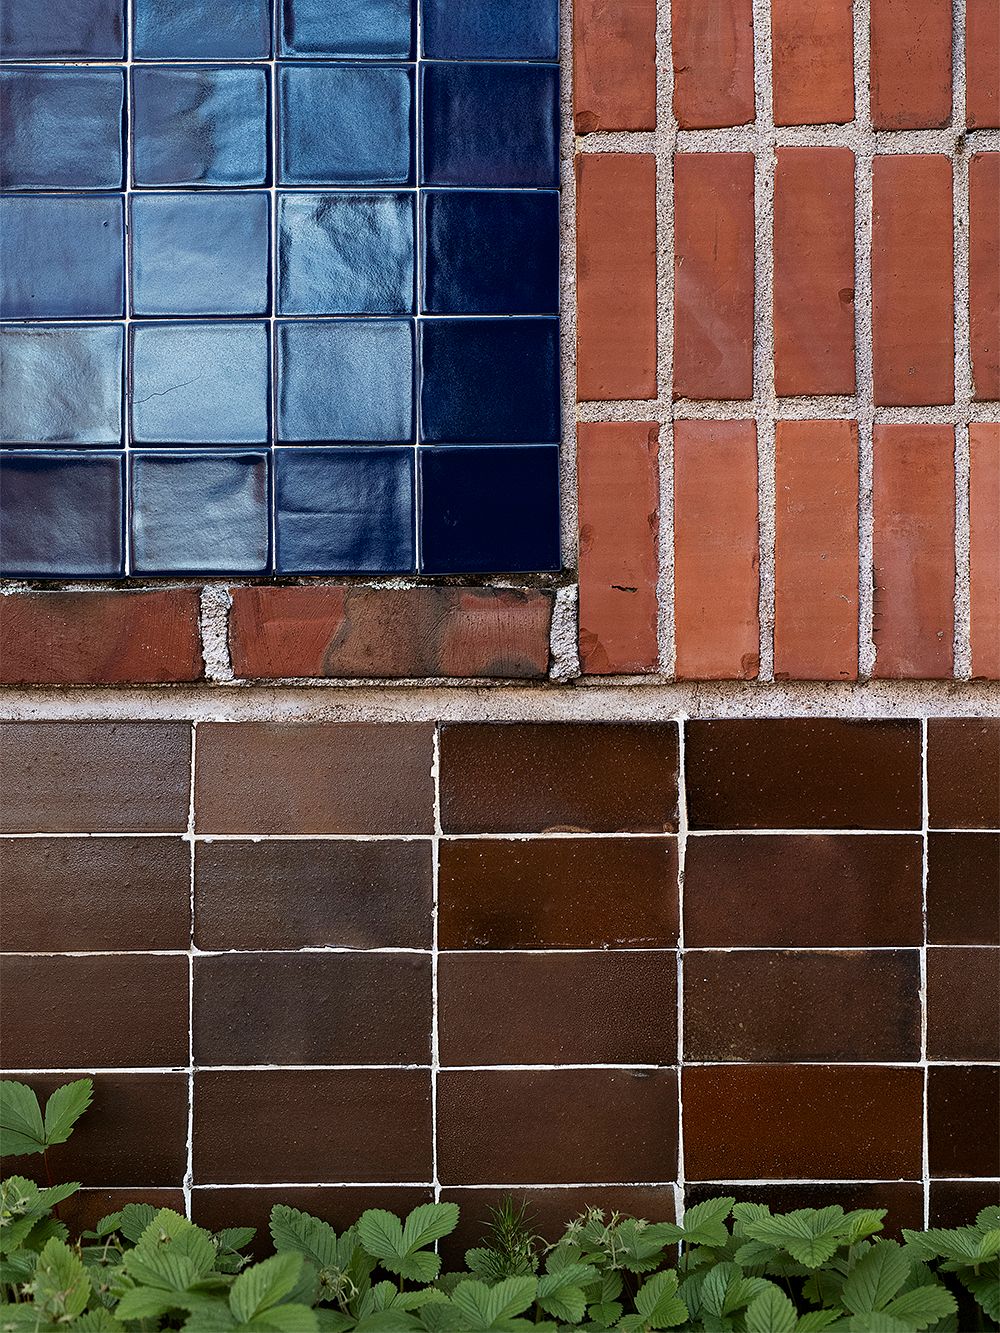 Different tiles and bricks